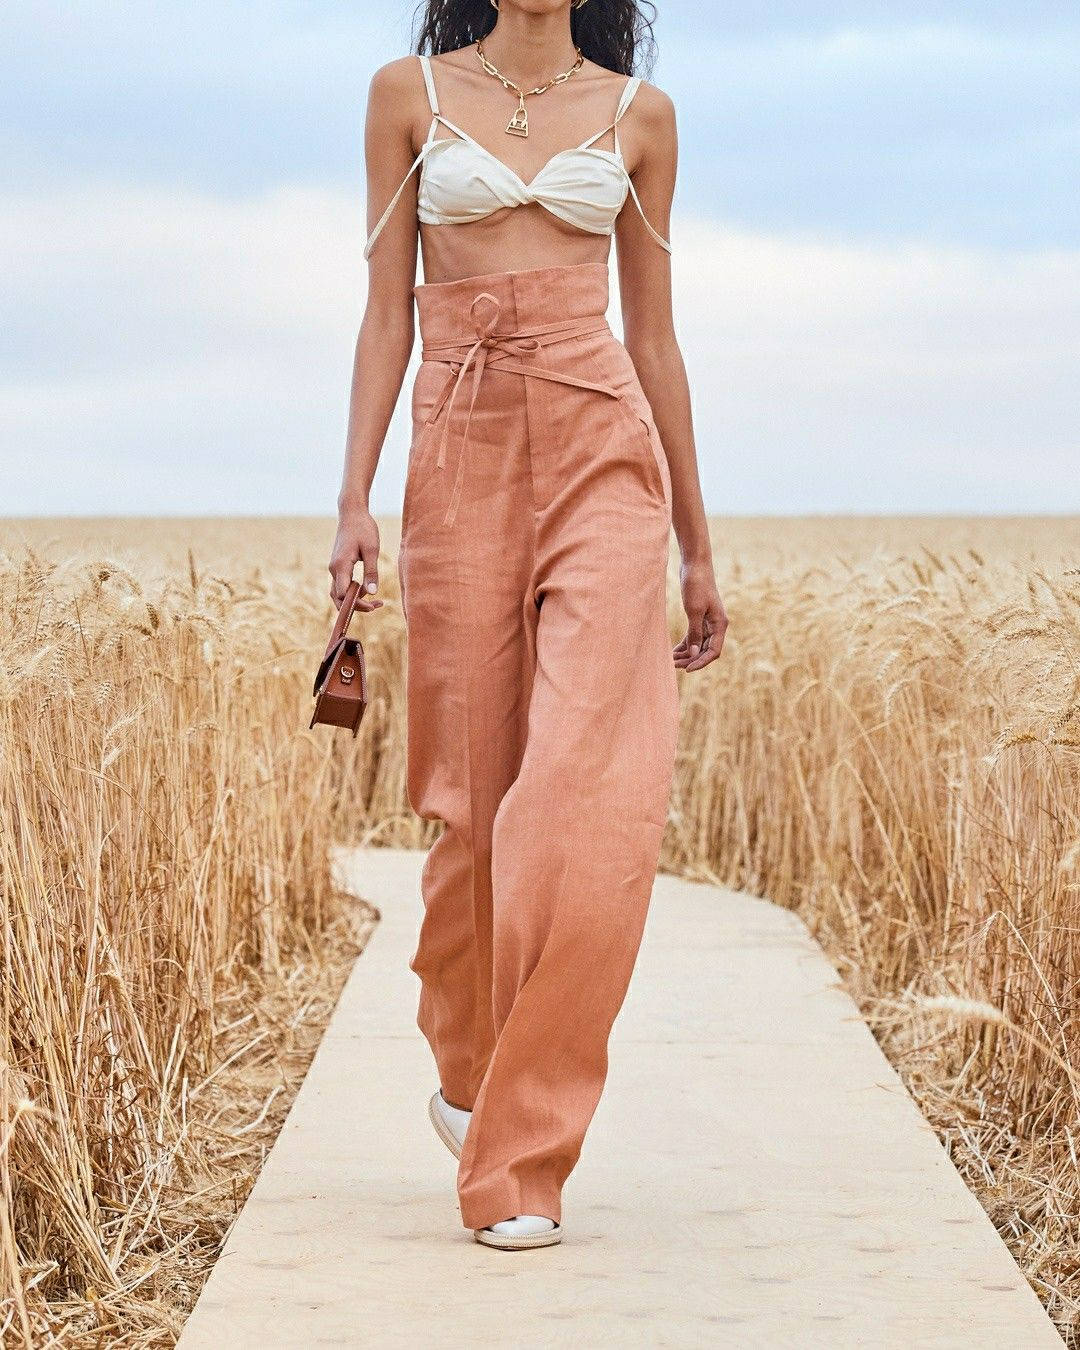 Caption: Elegant Fashion with Jacquemus - Model in Top and Pants Wallpaper